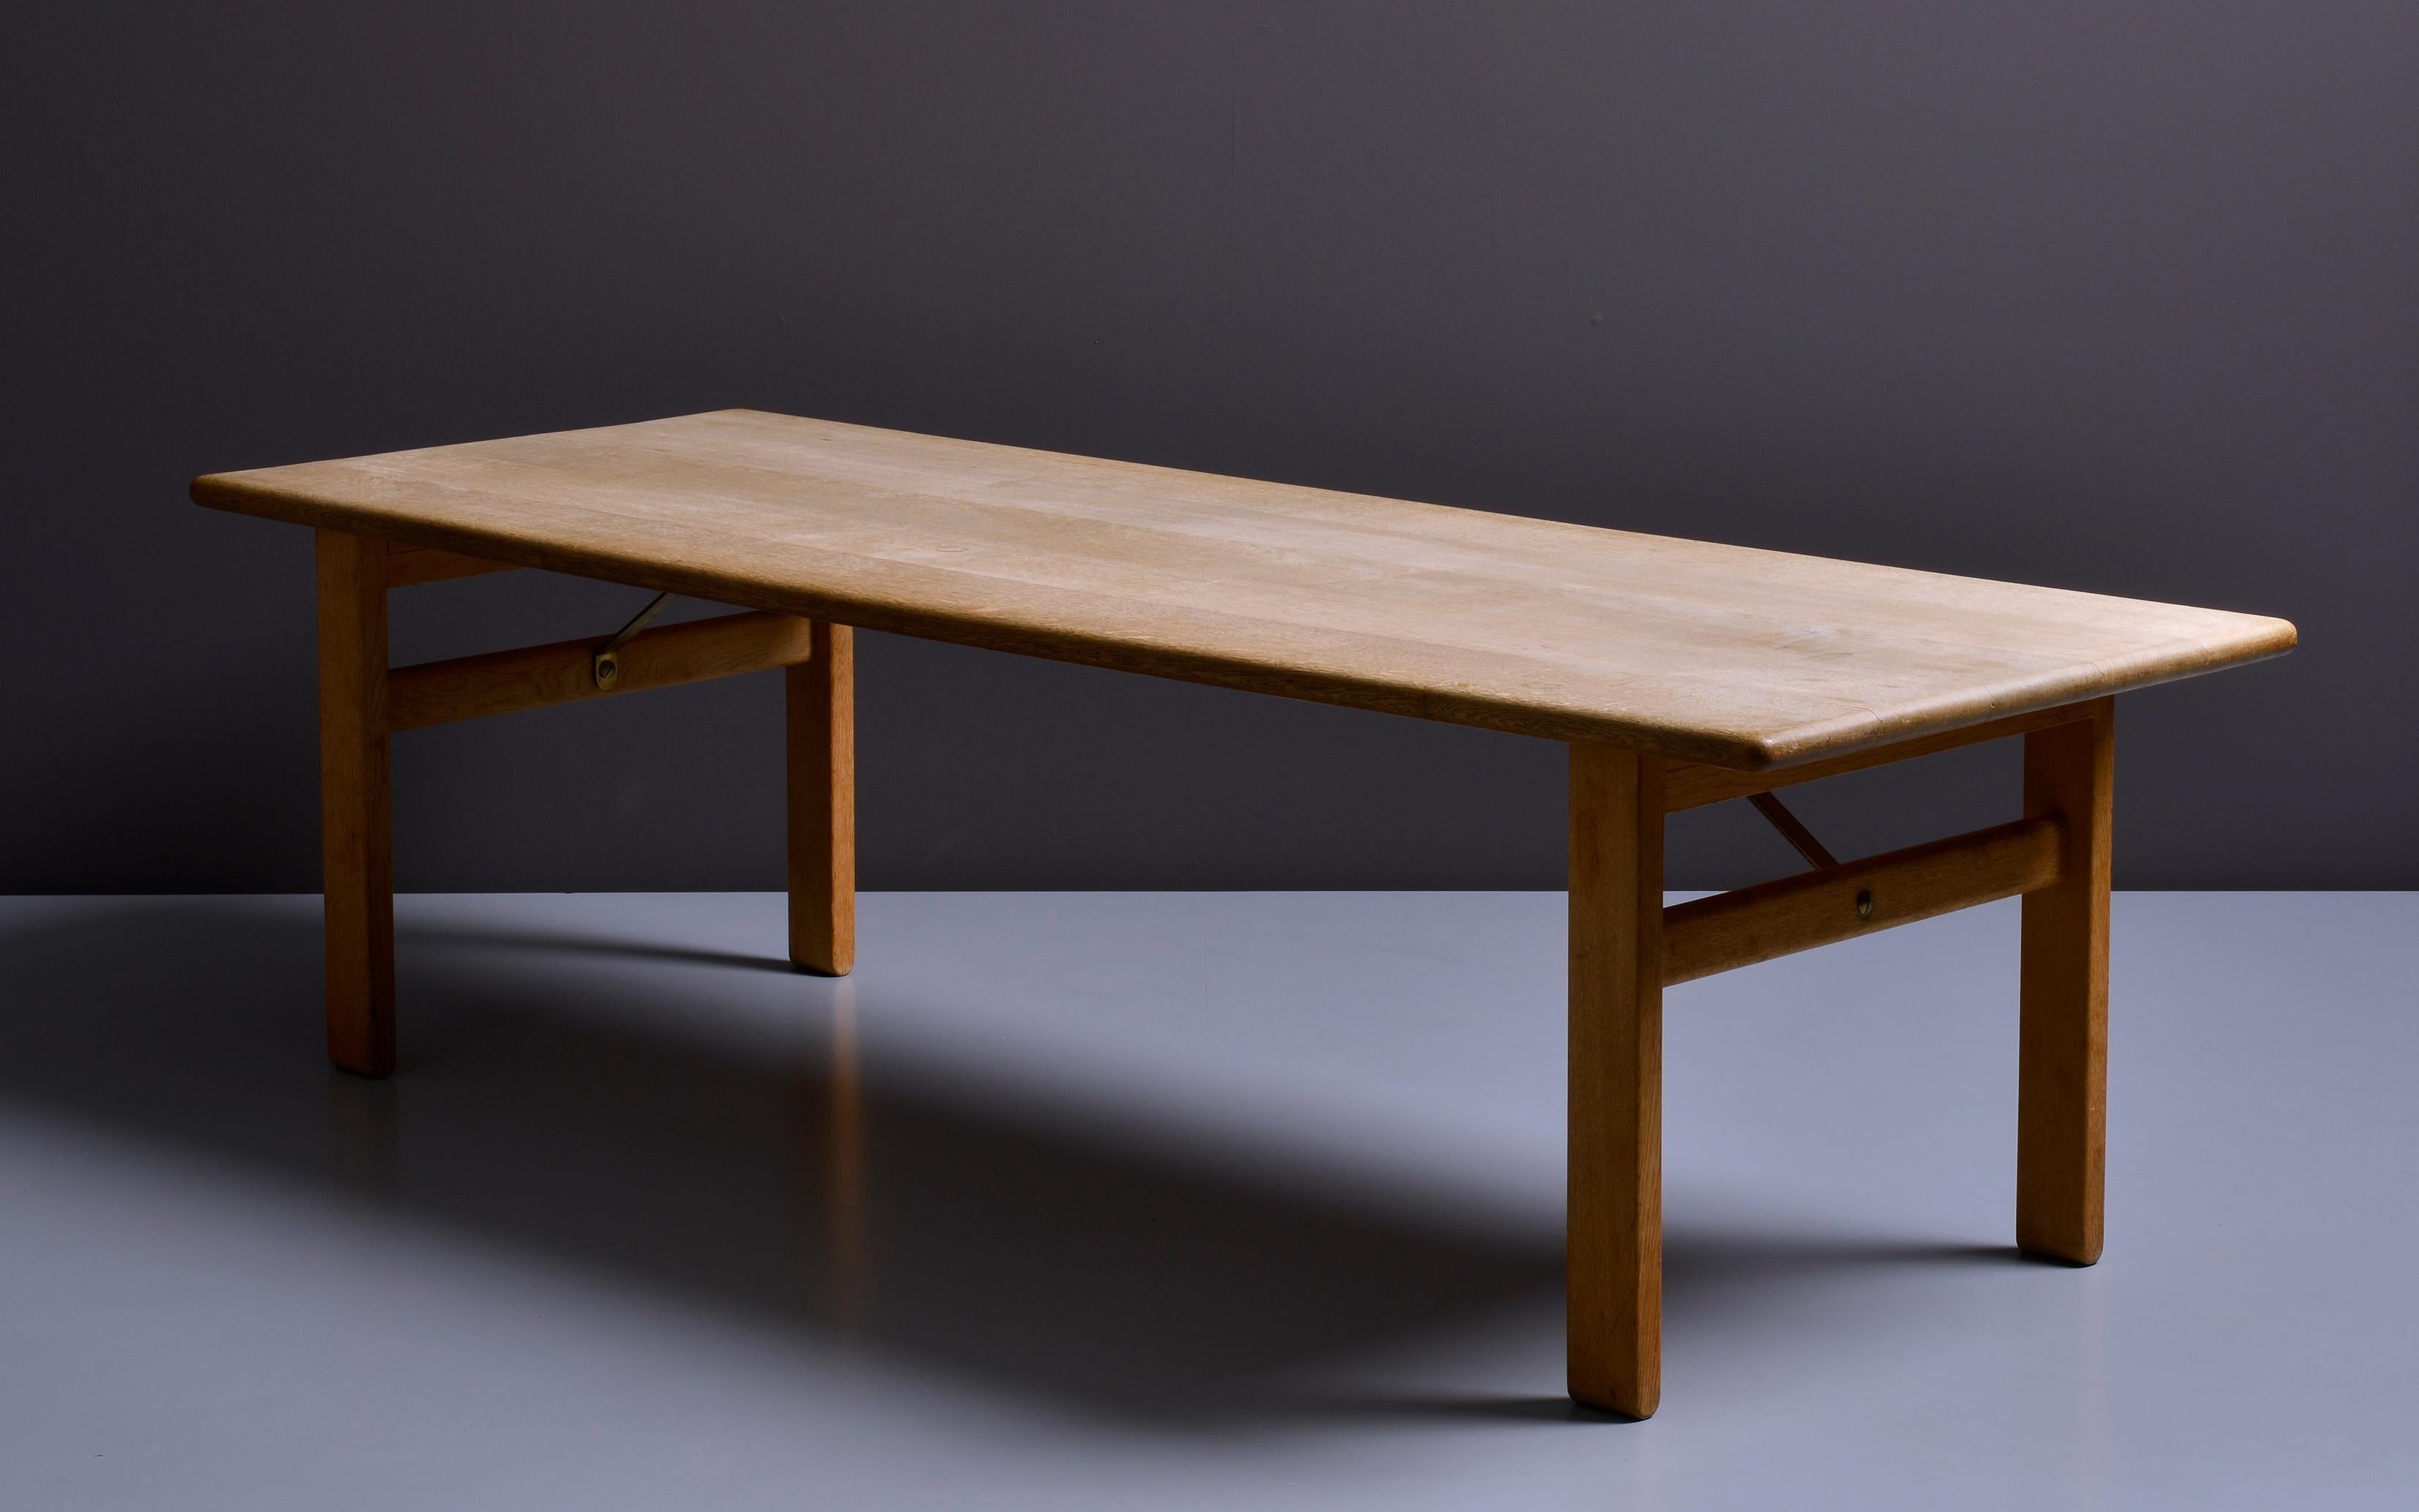 Rare Hans J. Wegner Coffee Table by Getama in light natural oak and brass details. Matches the GE290 Sofa Series.